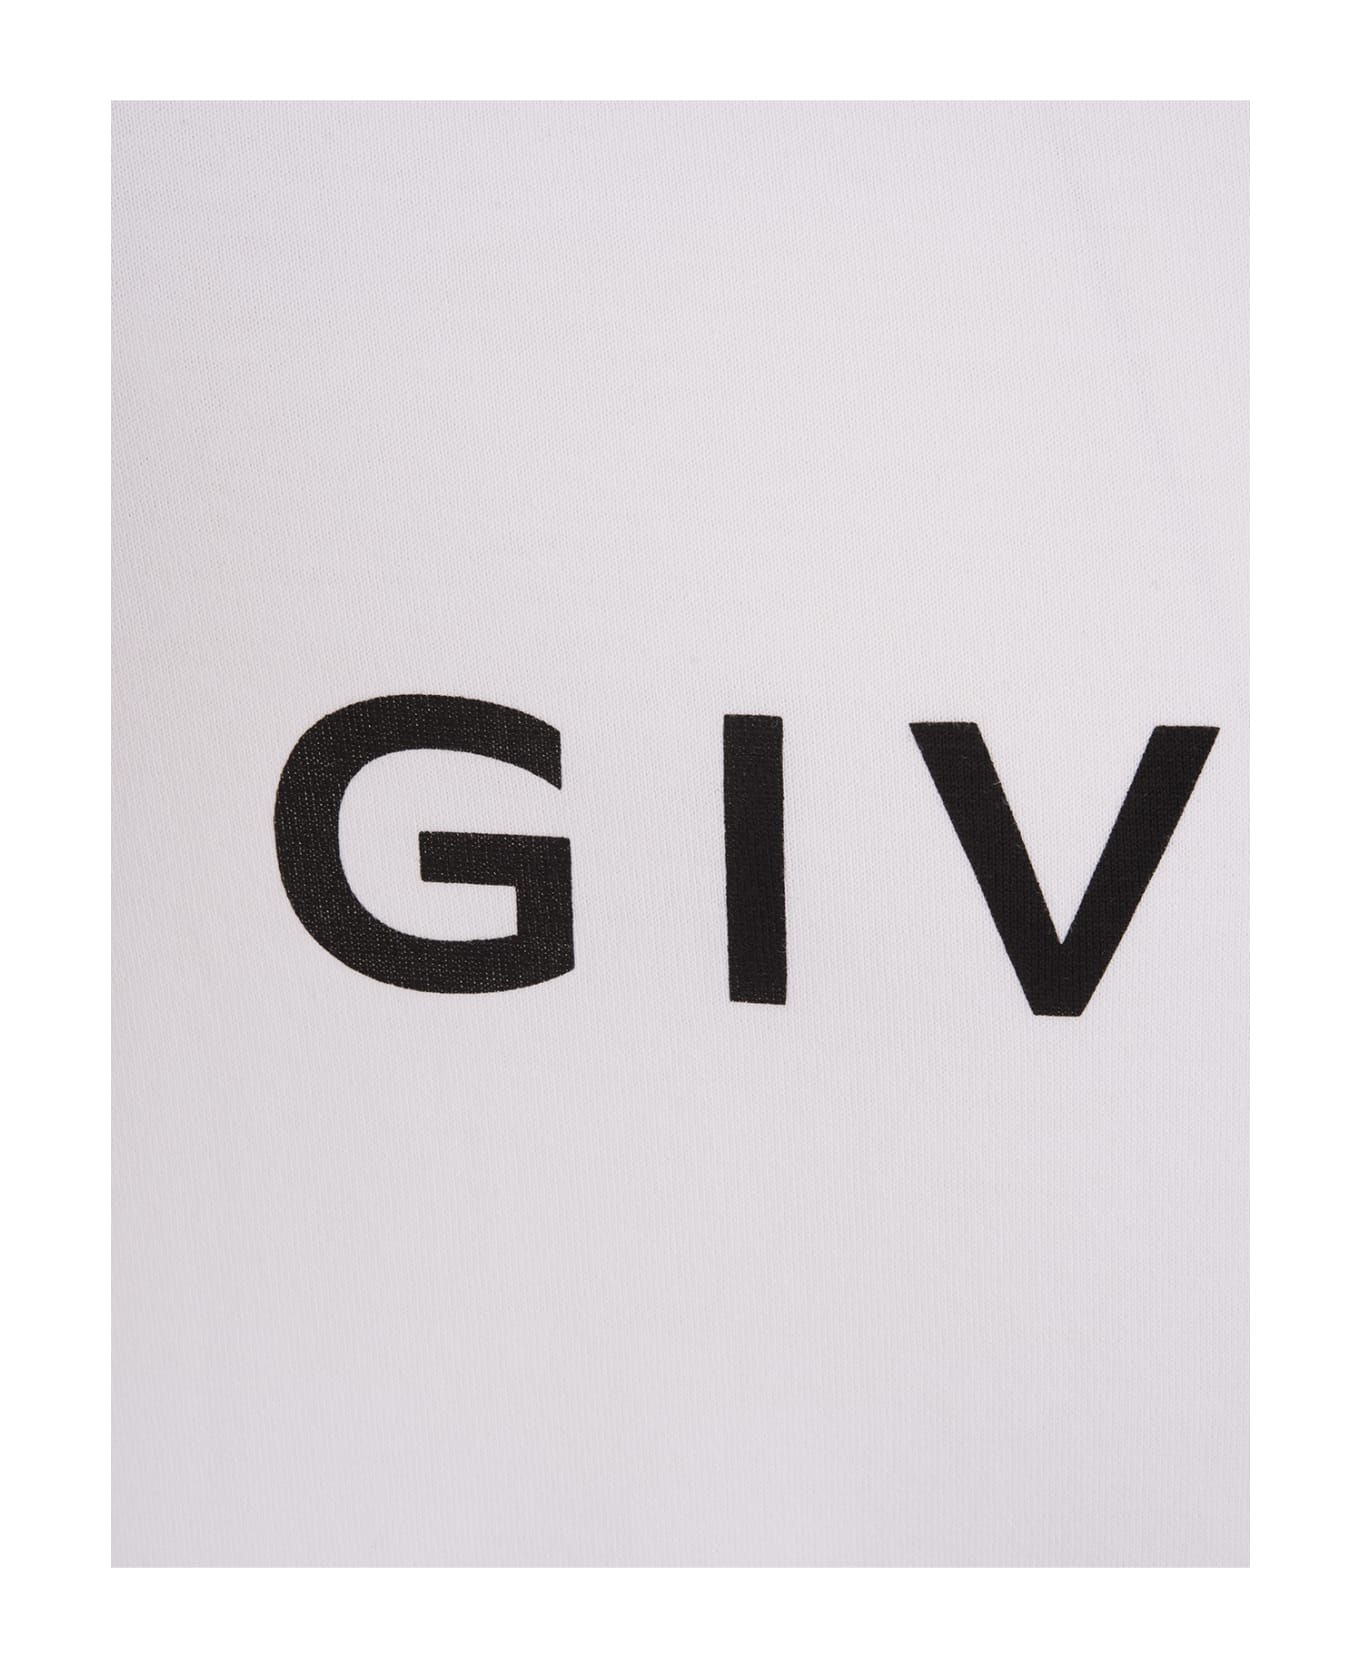 Givenchy White T-shirt With Givenchy Archetype Print On Front - White